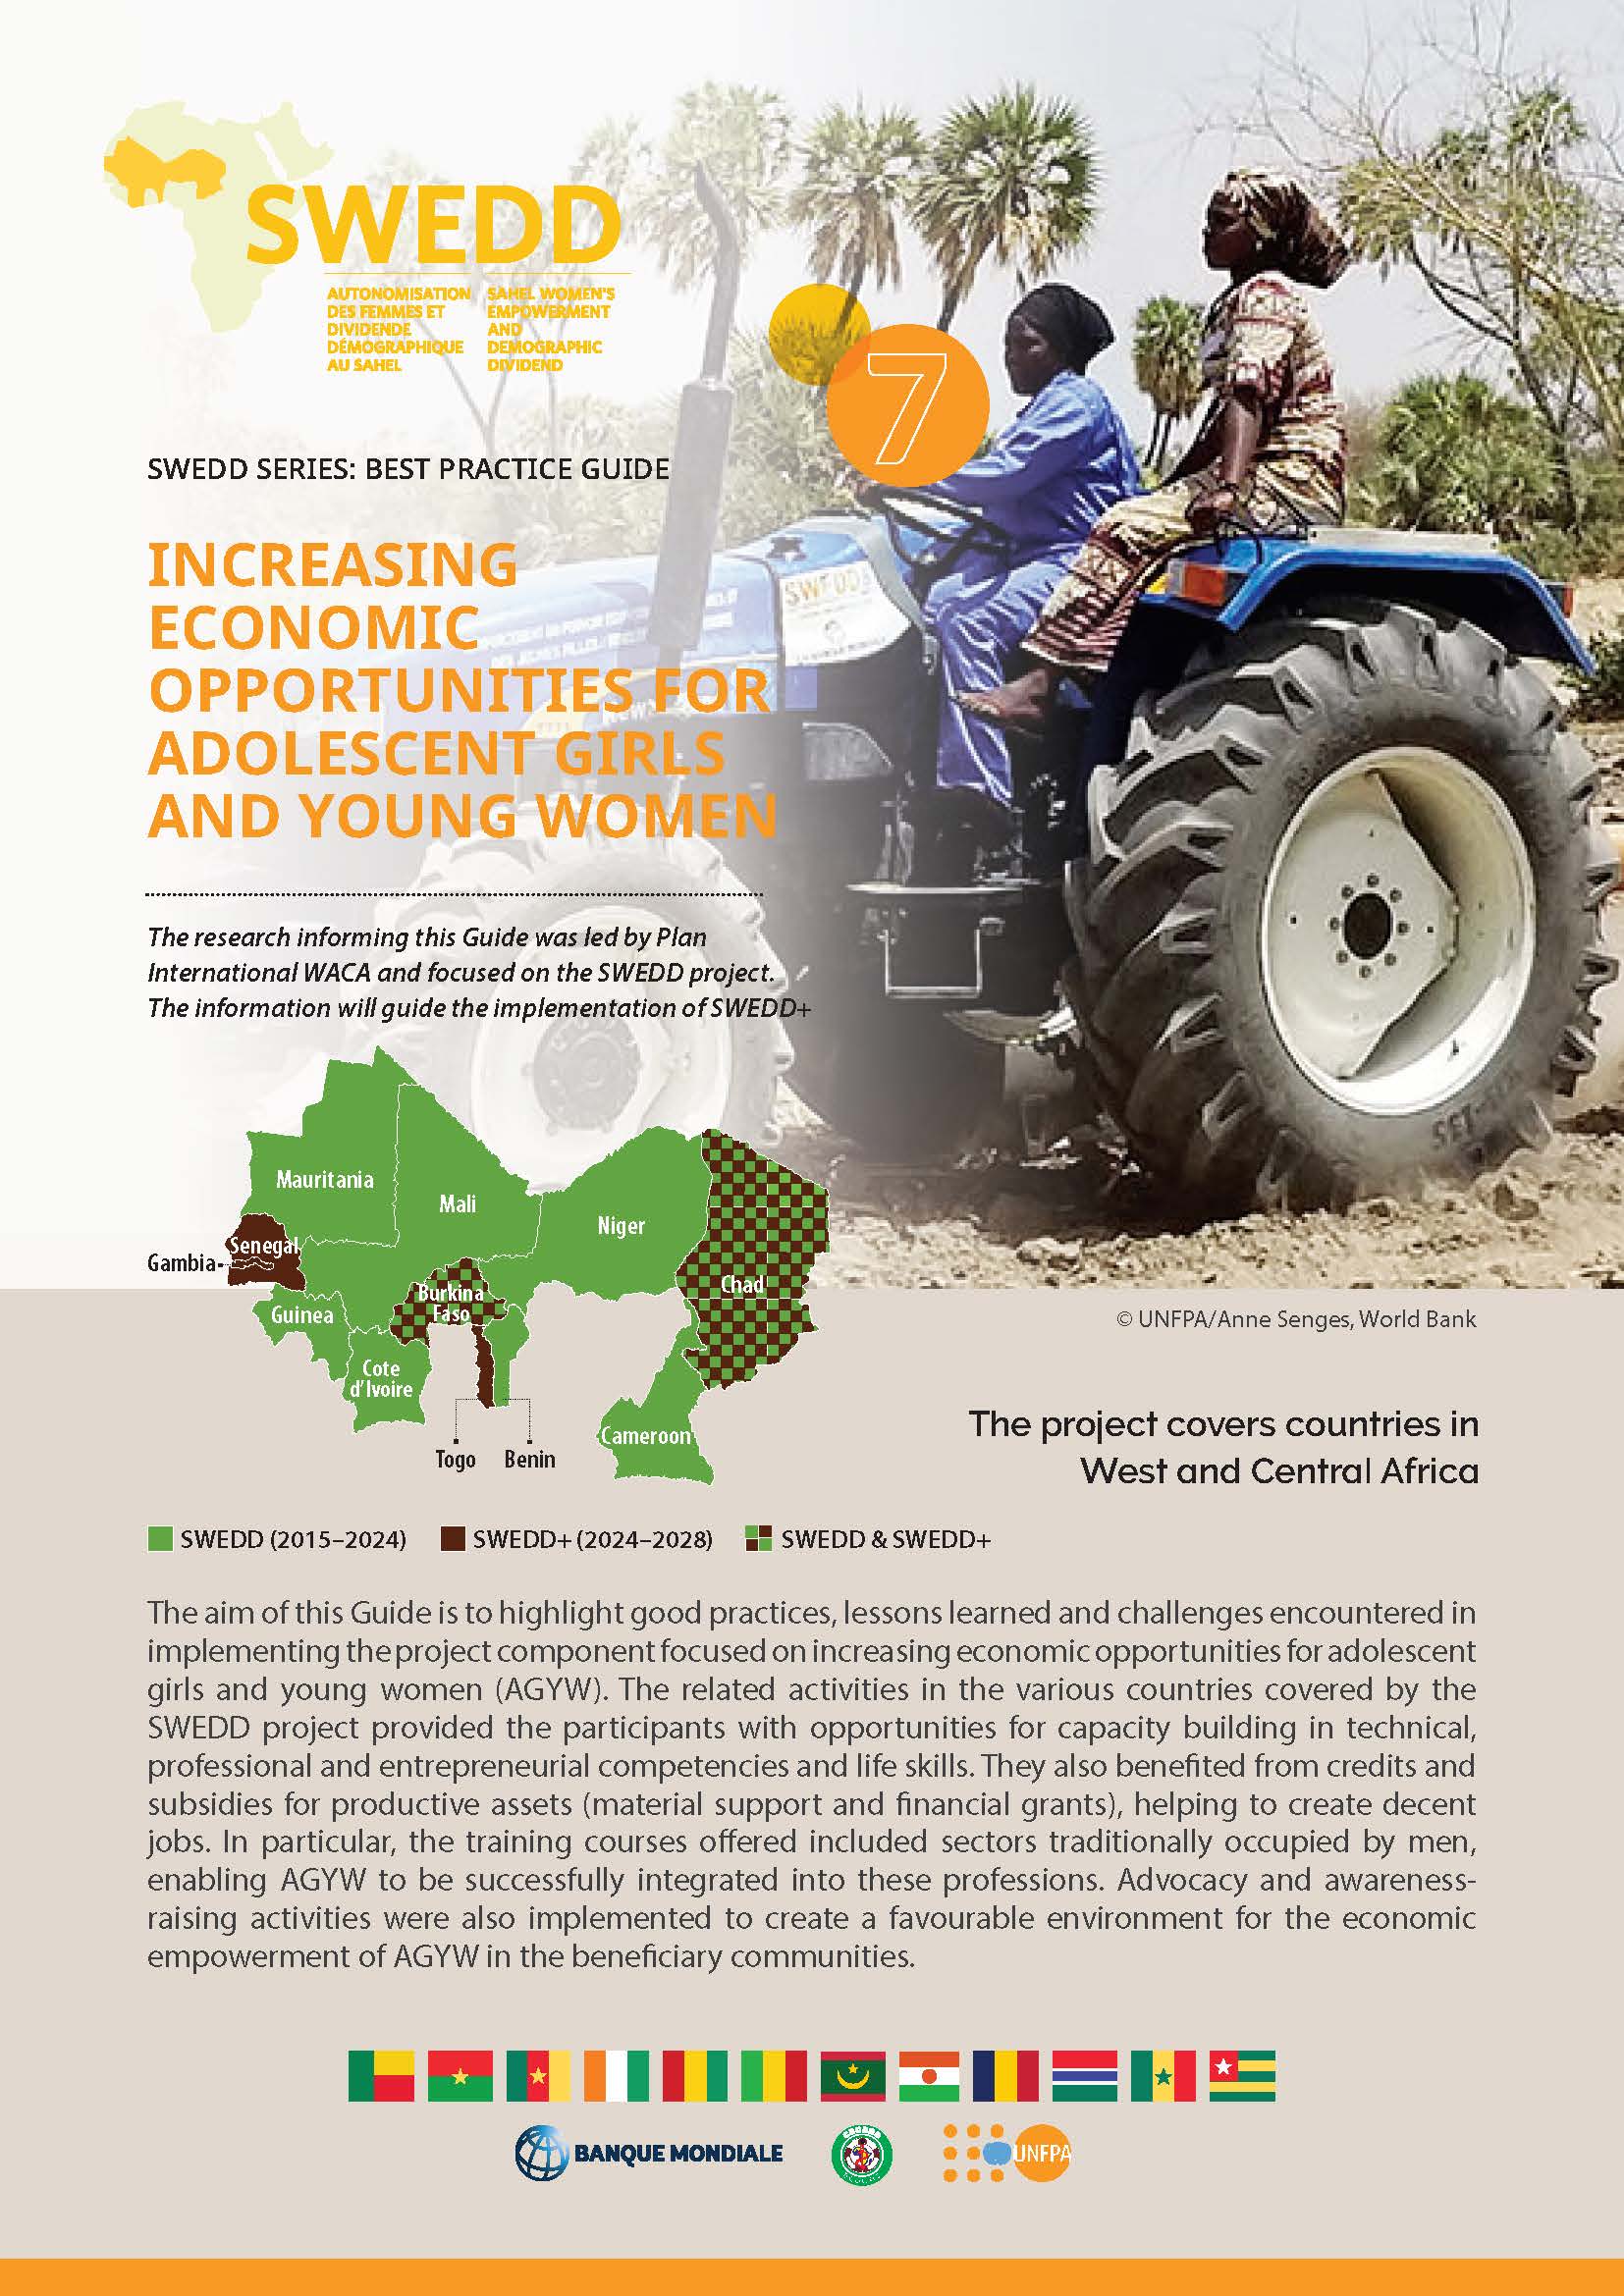 7. Increasing economic opportunities for adolescent girls and young women